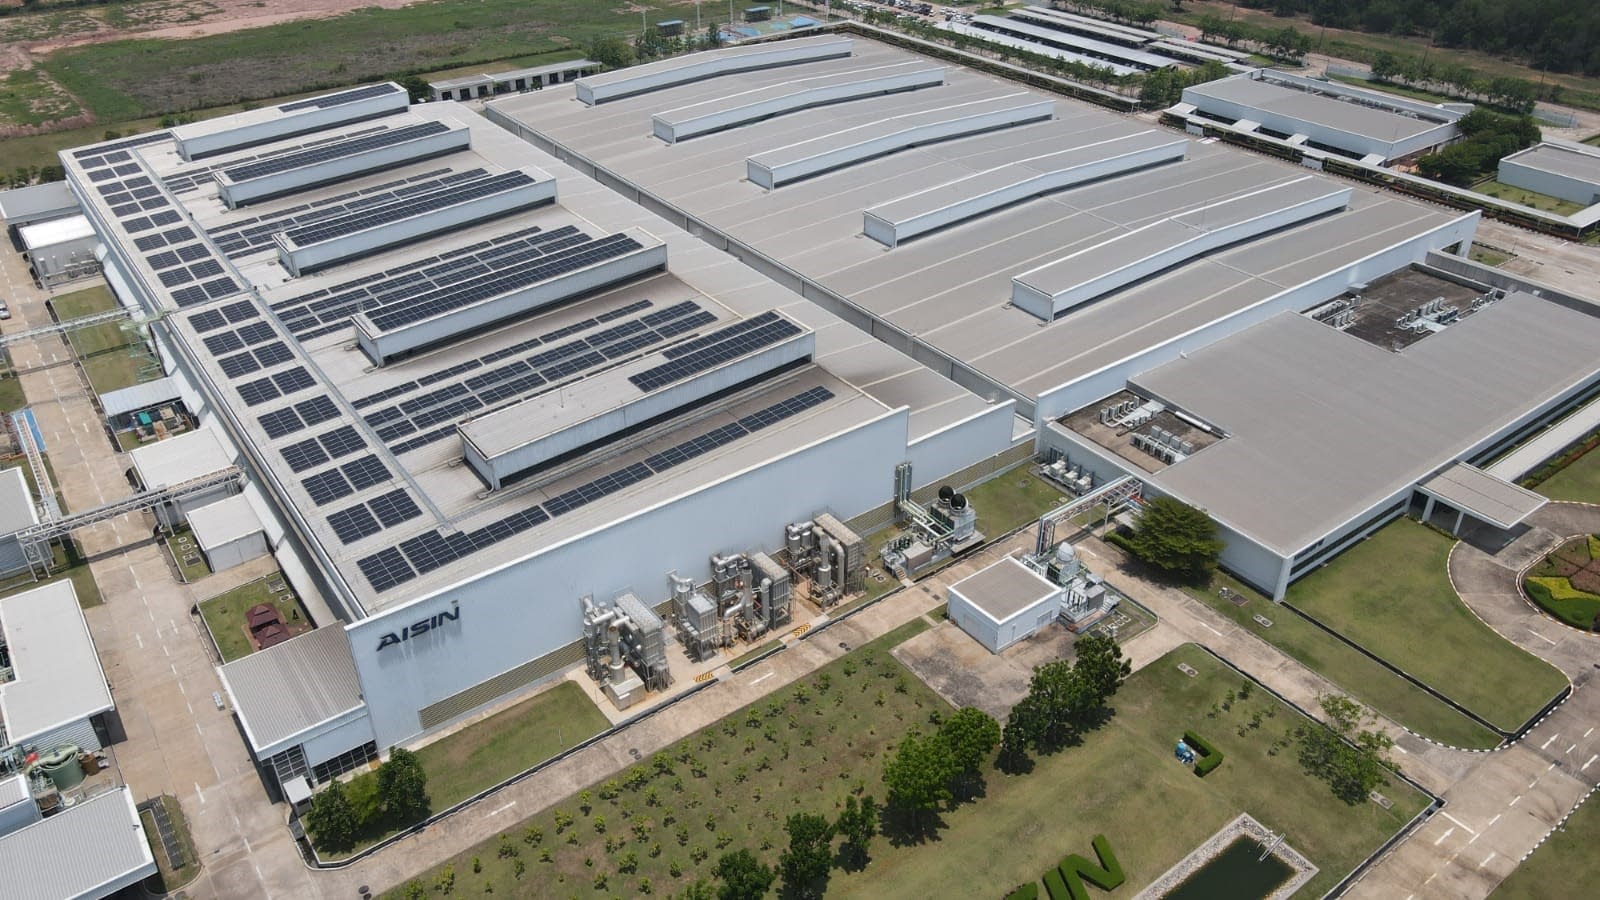 Read more about the article Aisin Group and Constant Energy Execute a Corporate PPA to Expand Its Current Solar Rooftop Operations to 3.7mw